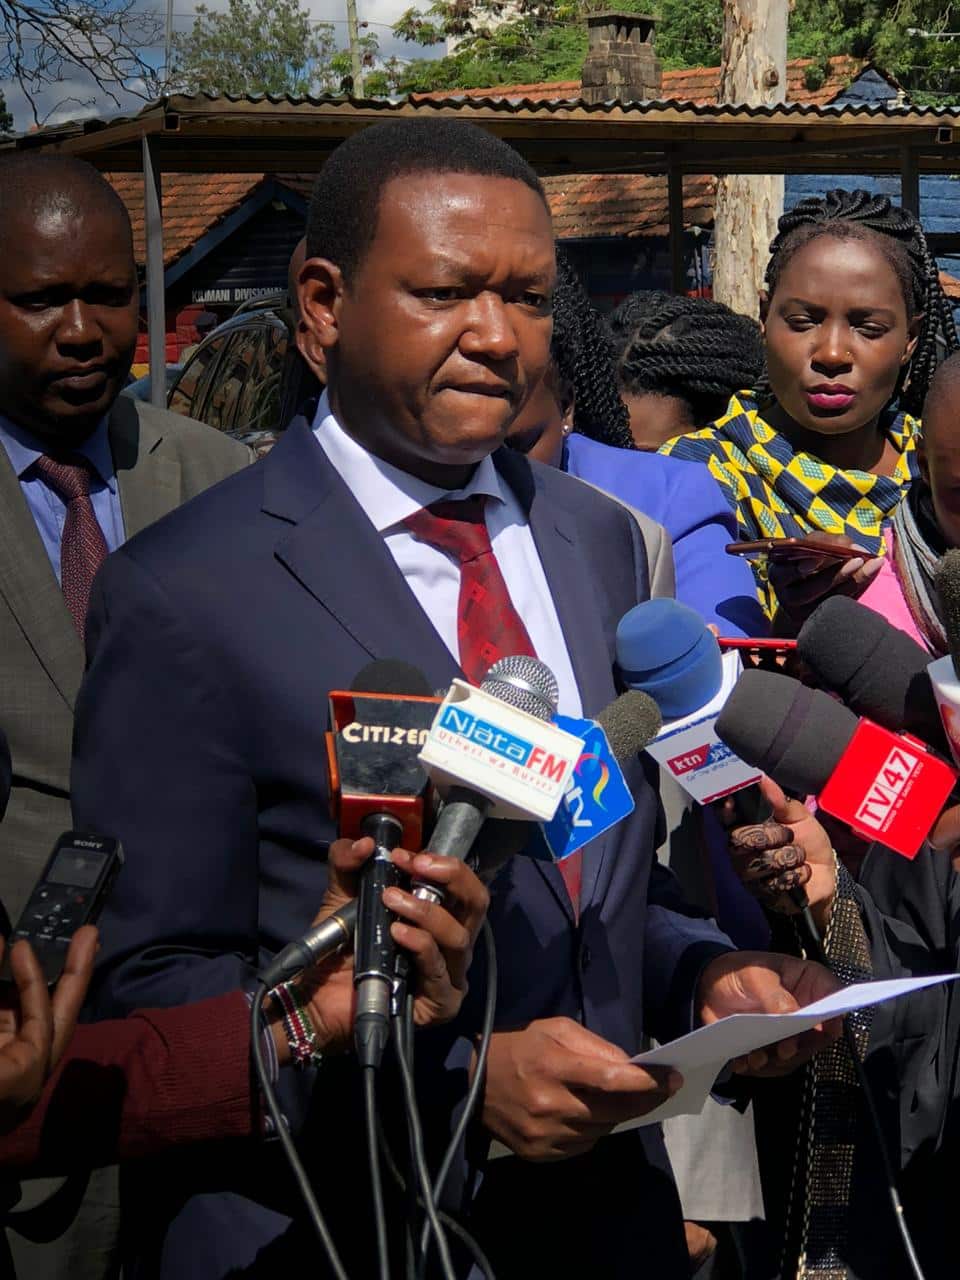 Alfred Mutua claims Duale, Murkomen threatened to teach him a lesson for opposing Ruto